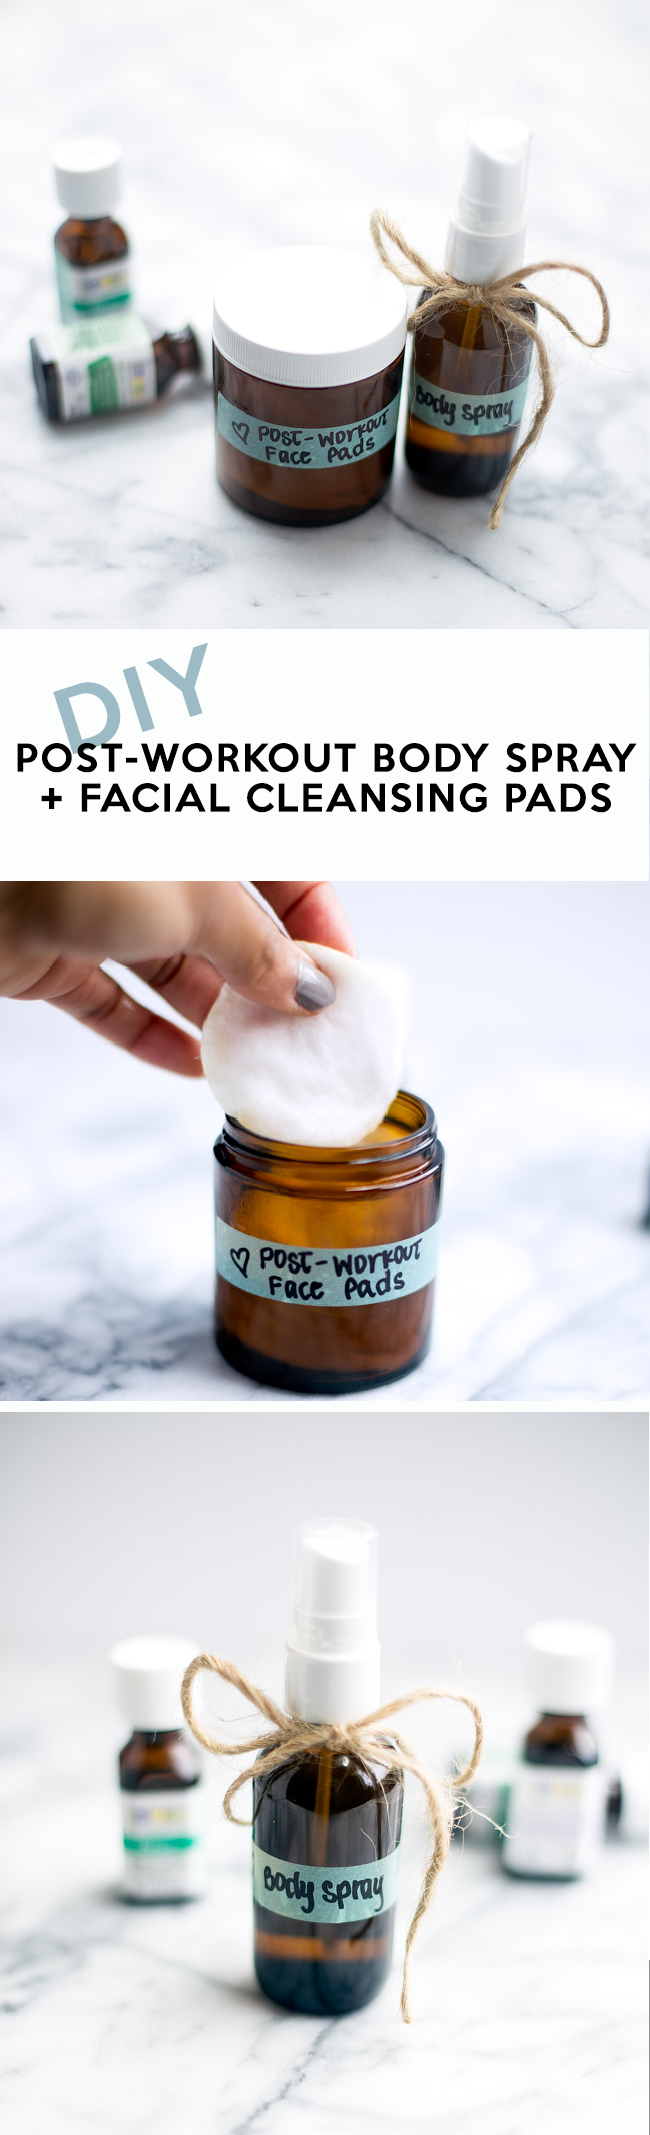 Freshen up after your workout with DIY Facial Cleansing Pads and Body Spray.